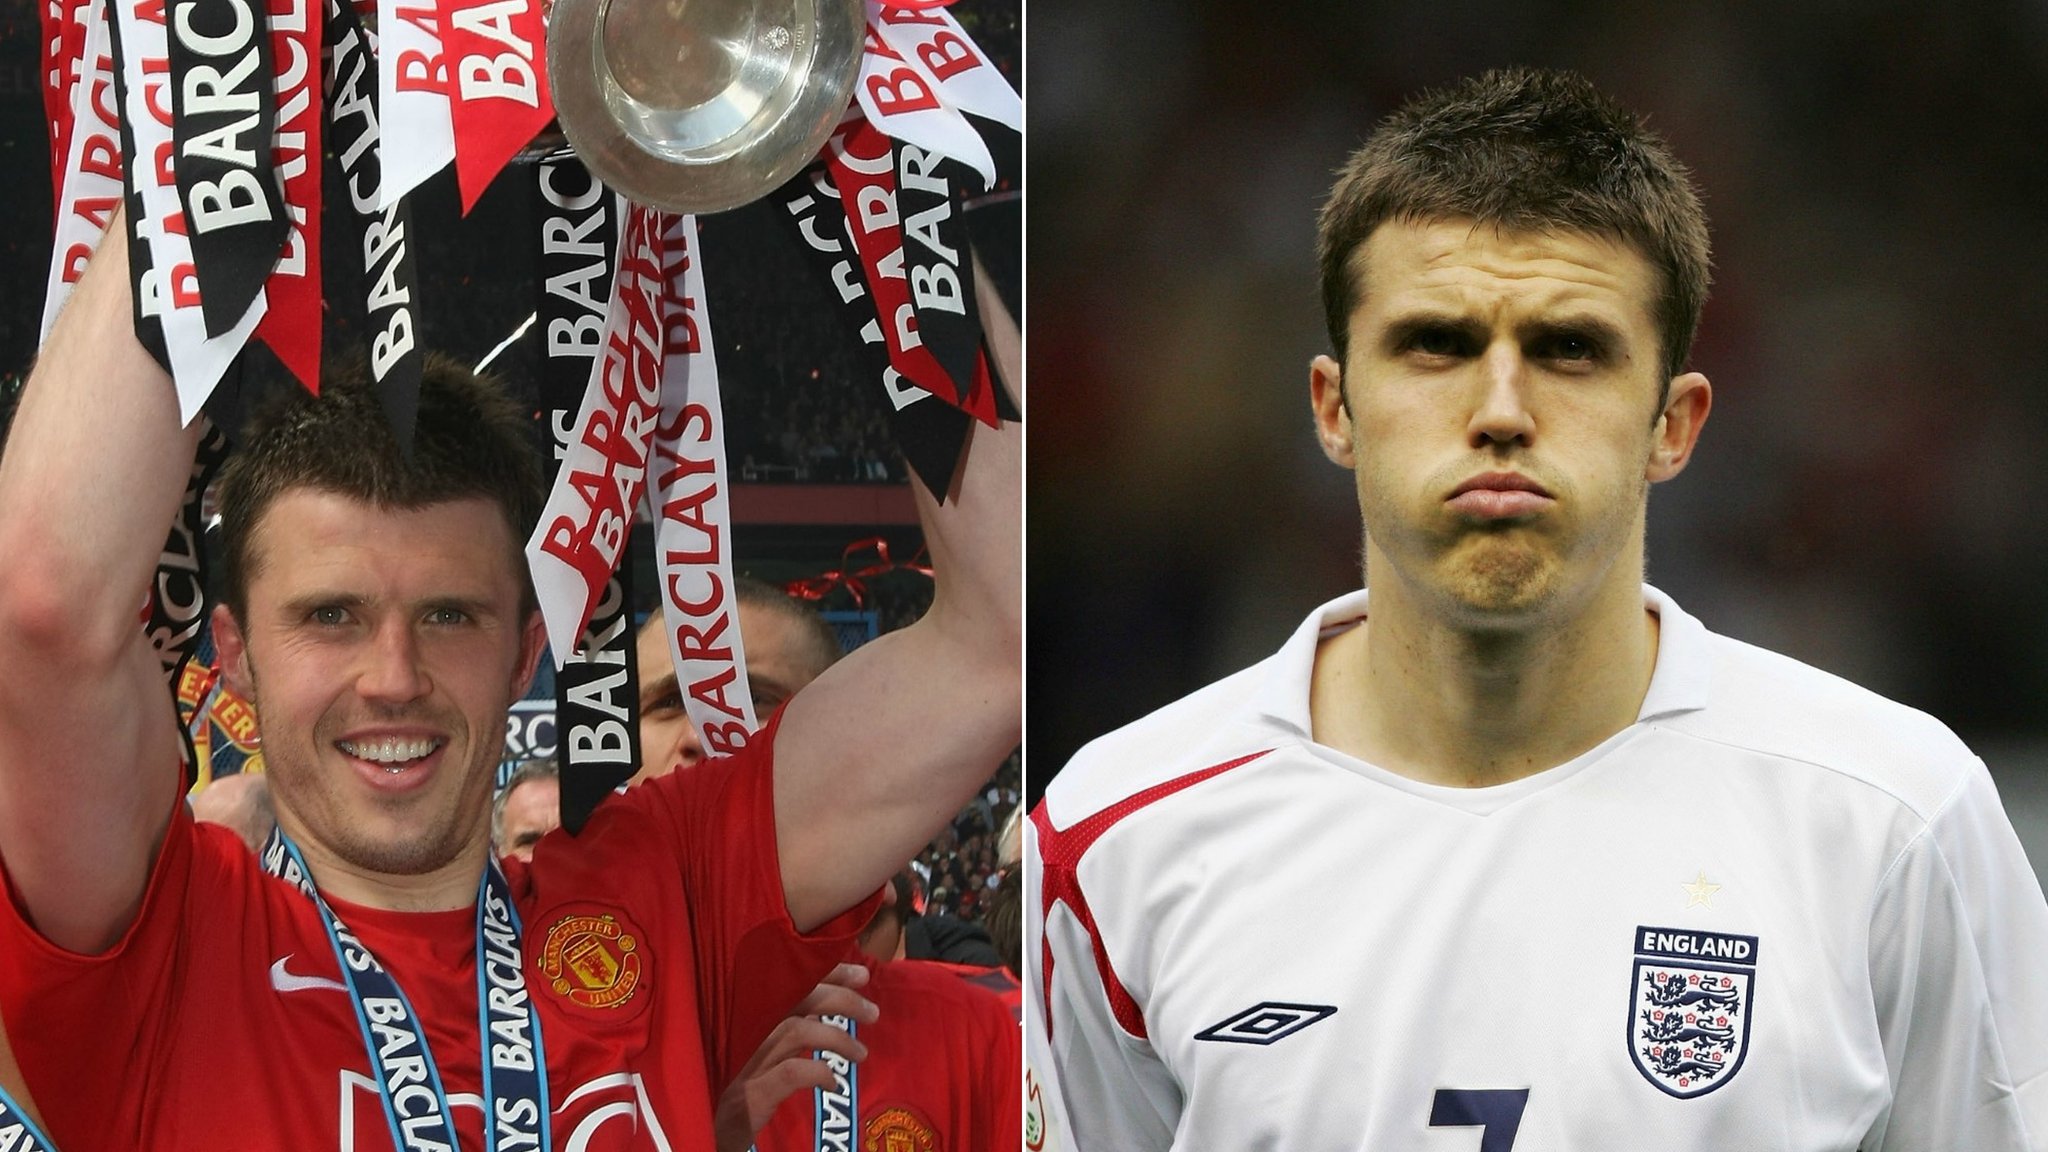 Overrated or England's lost midfield talent? The Carrick debate